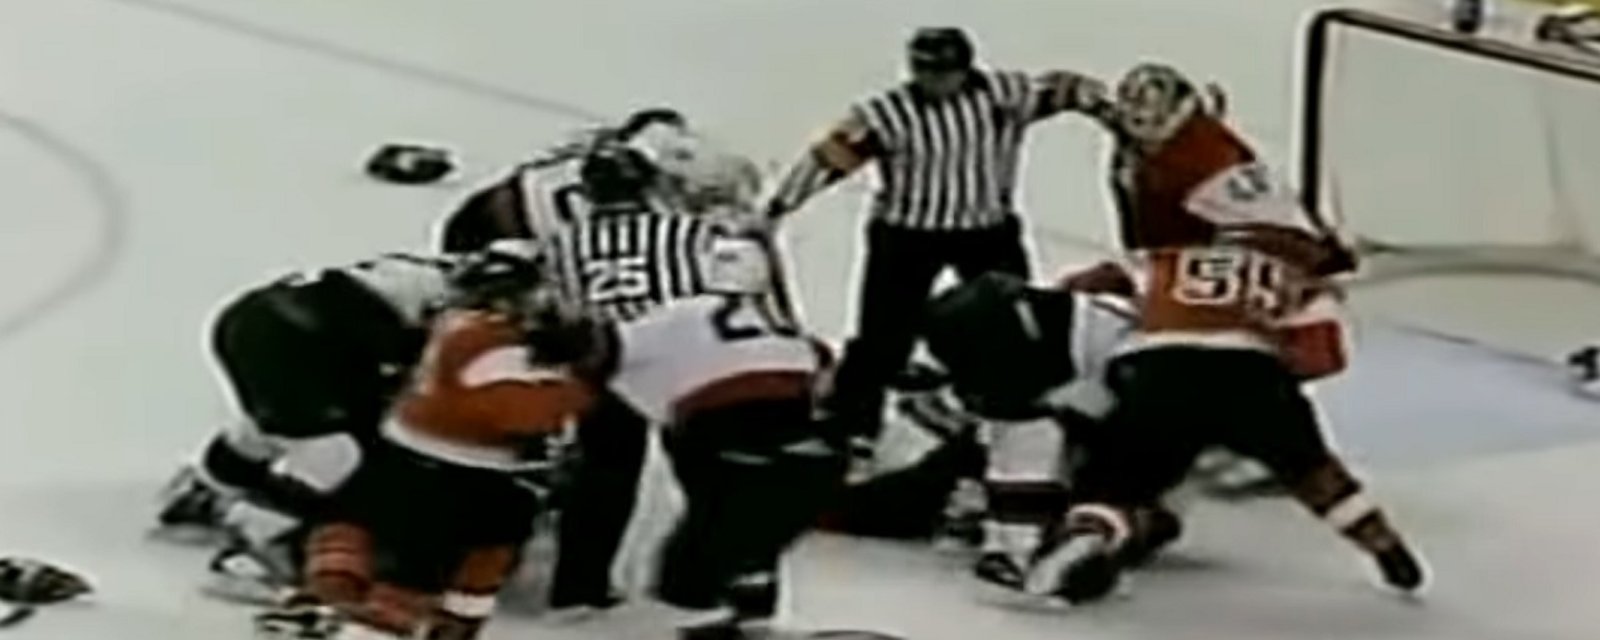 Throwback: The Flyers and Senators throw down in classic 2004 brawl.